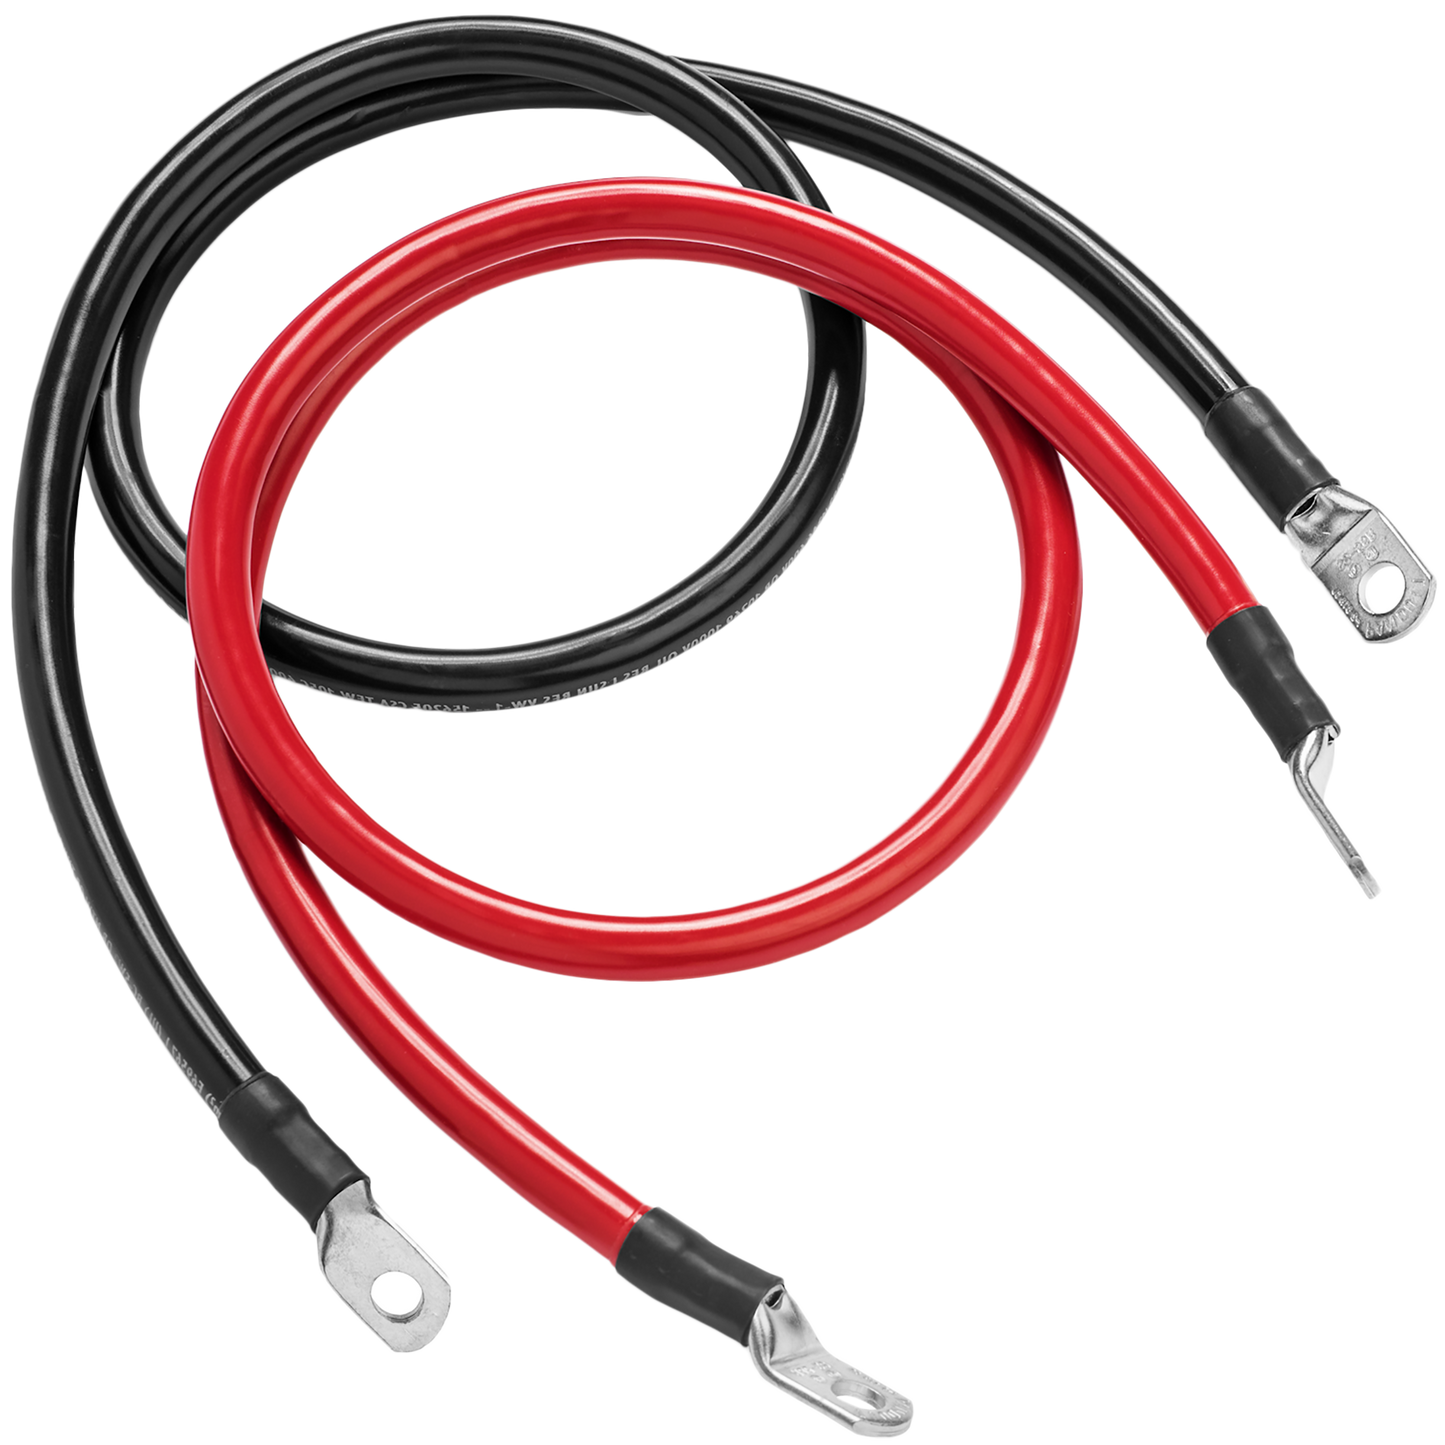 Battery Cable Kit Red/Black - 24 inch